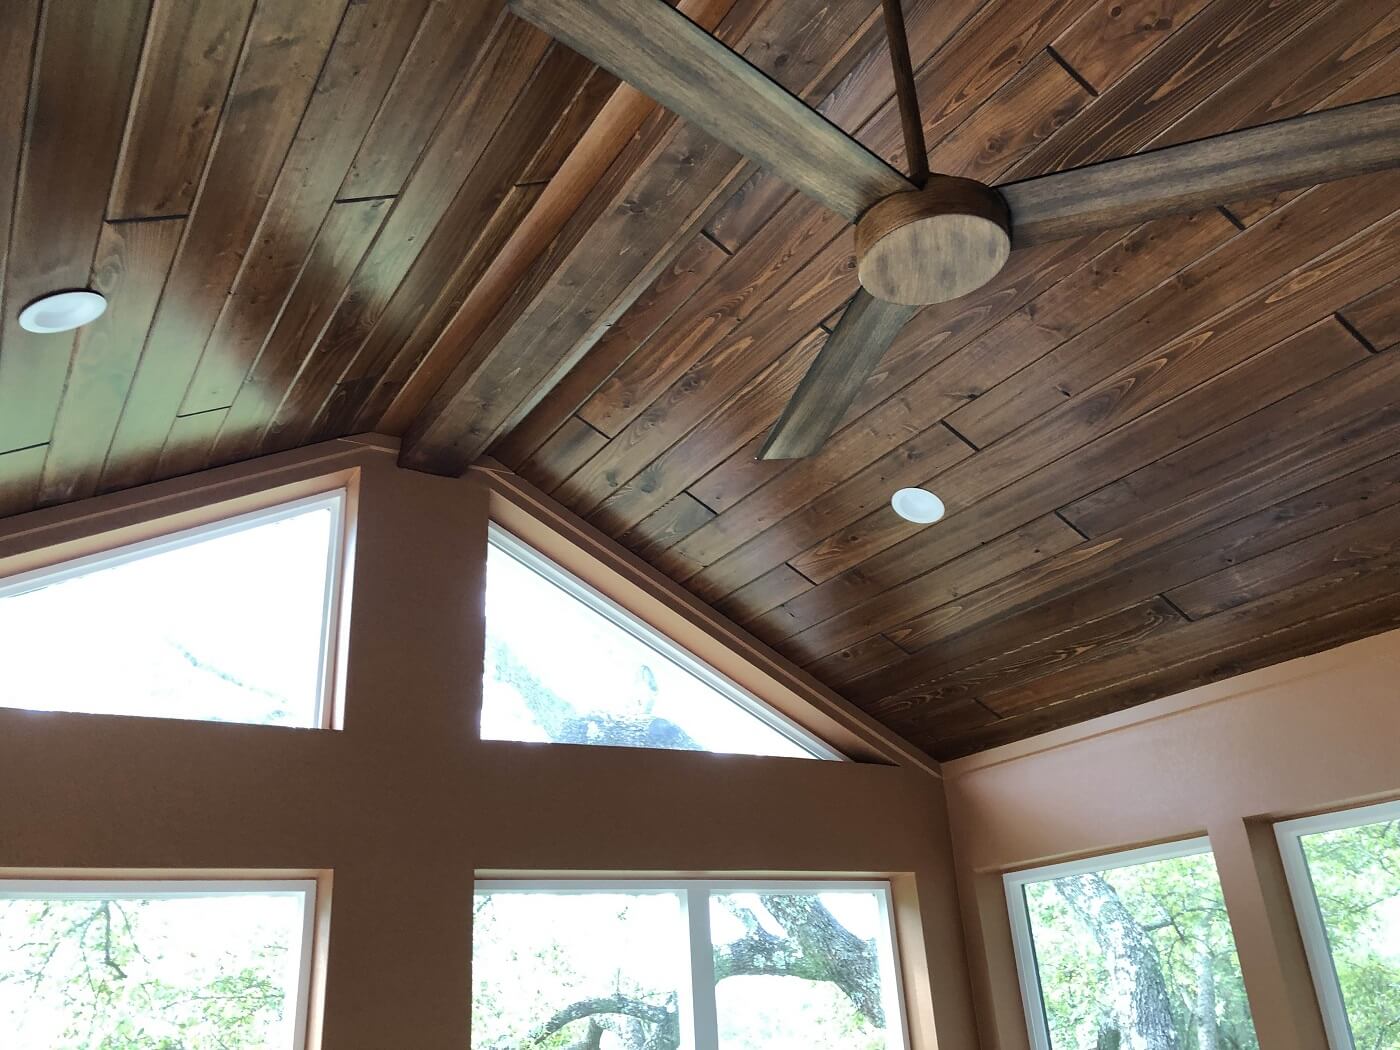 Sunroom ceiling detail with lighting